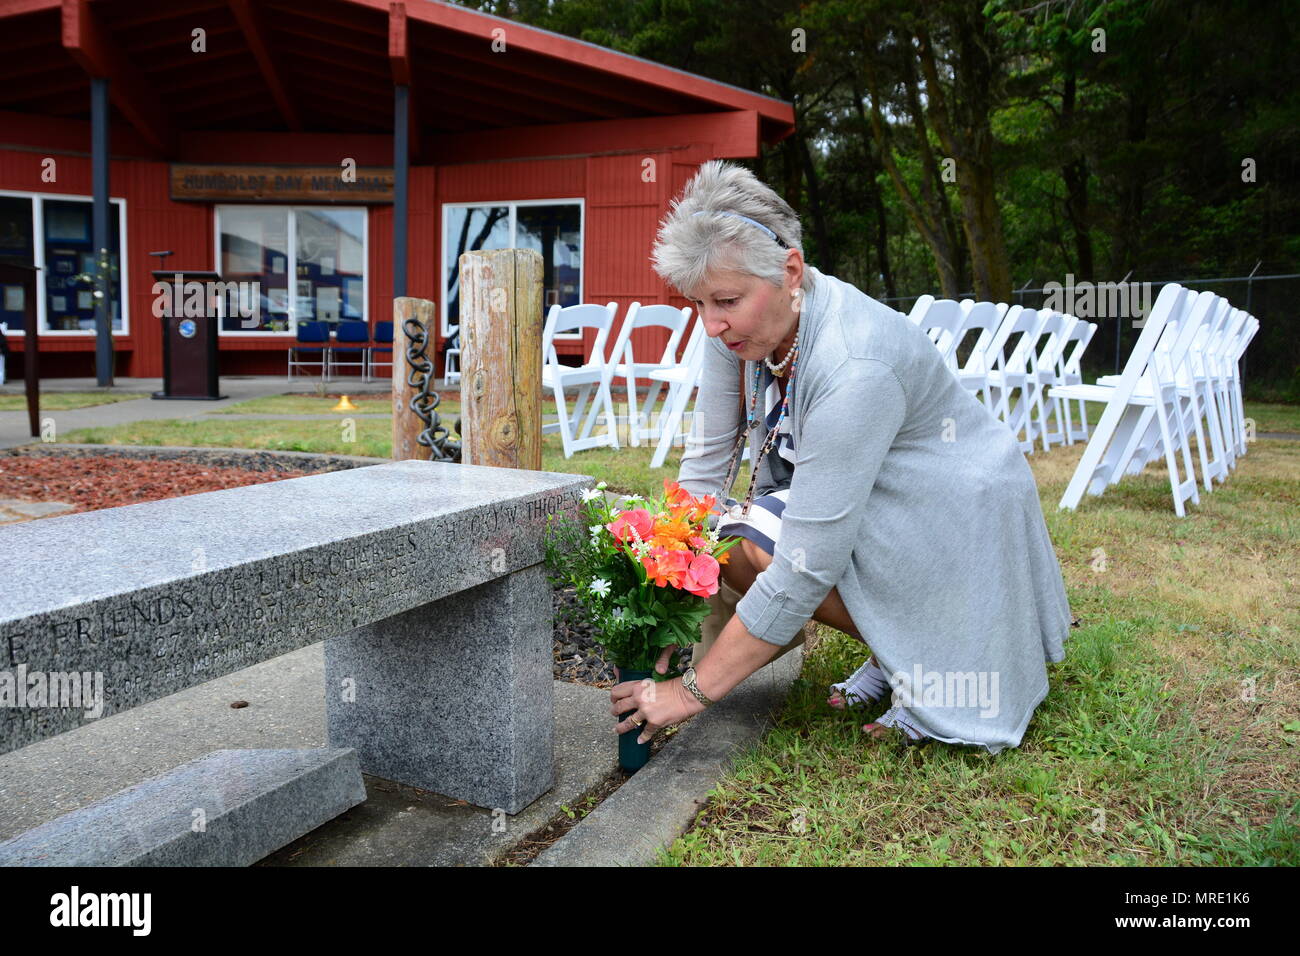 The mother of Lt. j.g. Charles Thigpen IV places flowers at the Humboldt Bay Memorial before a memorial ceremony at Coast Guard Sector Humboldt Bay, June 8, 2017. Thigpen was one of four crewmembers lost in the line of duty 20 years ago when the MH-65 Dolphin helicopter CG-6549 crashed 57 miles west of Cape Mendocino, Calif., during a search-and-rescue mission to save five sailors in a storm. U.S. Coast Guard photo by Petty Officer 3rd Class Sarah Wilson. Stock Photo